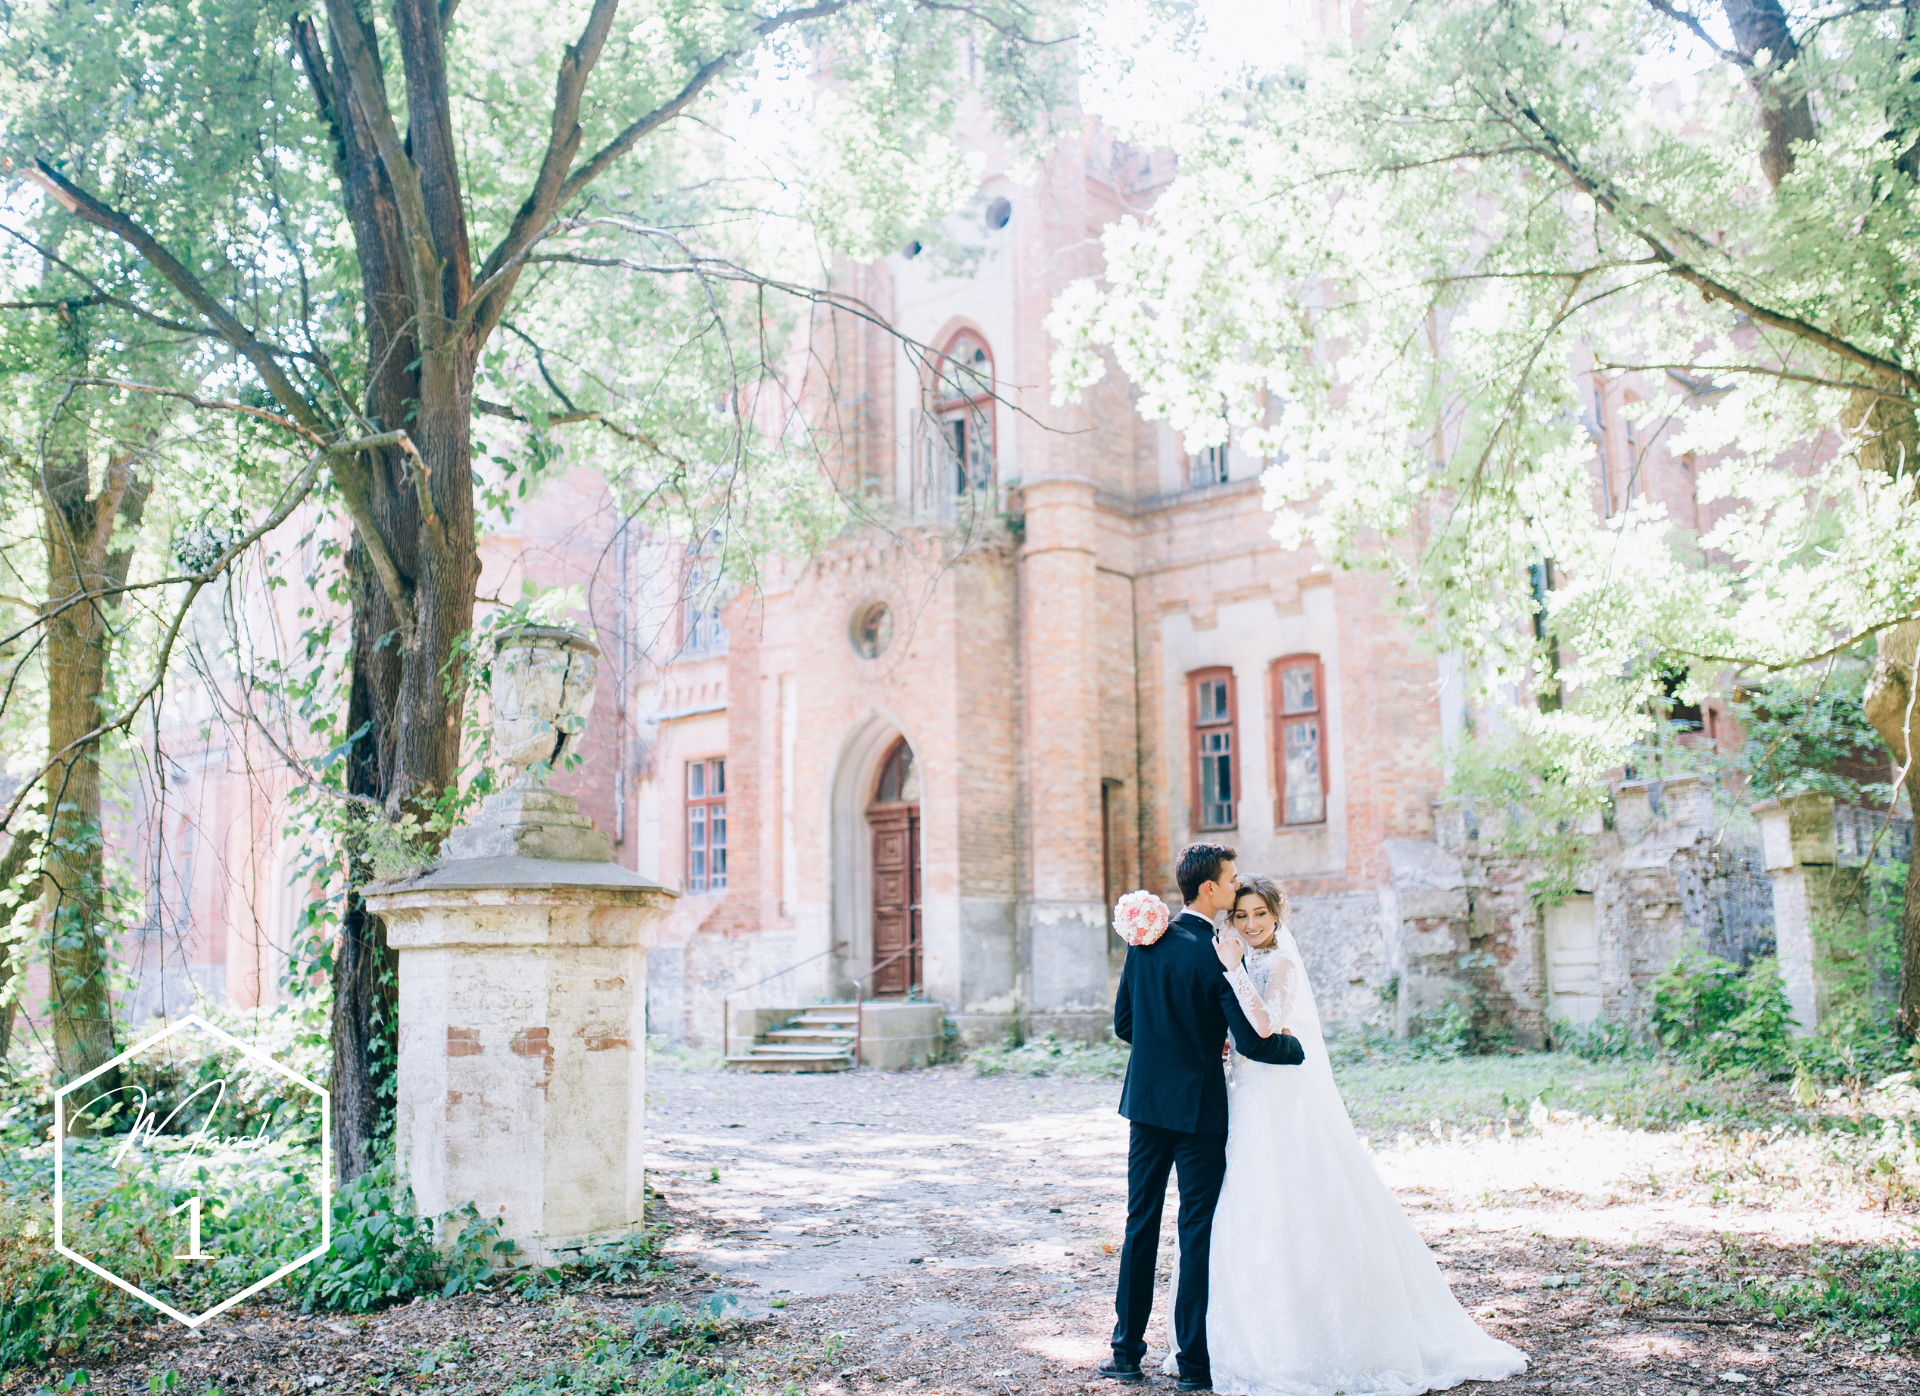 Bride and groom pose in front of stunning chateau wedding venue